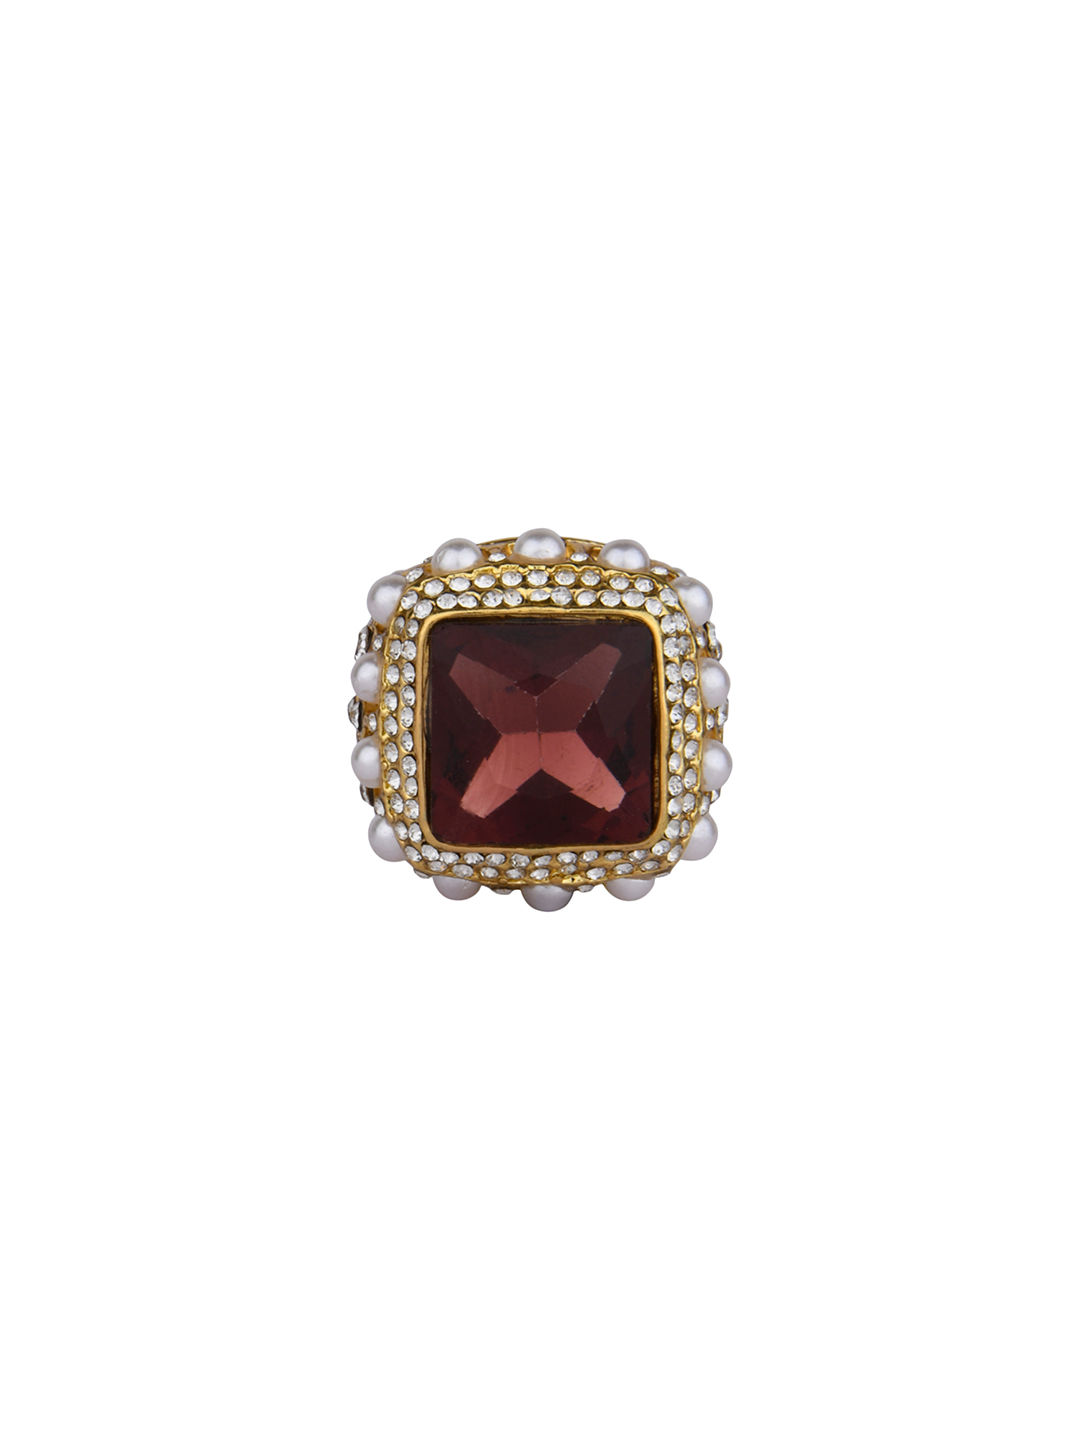 14K Yellow Gold Brown Agate Ring Russian Hallmarks